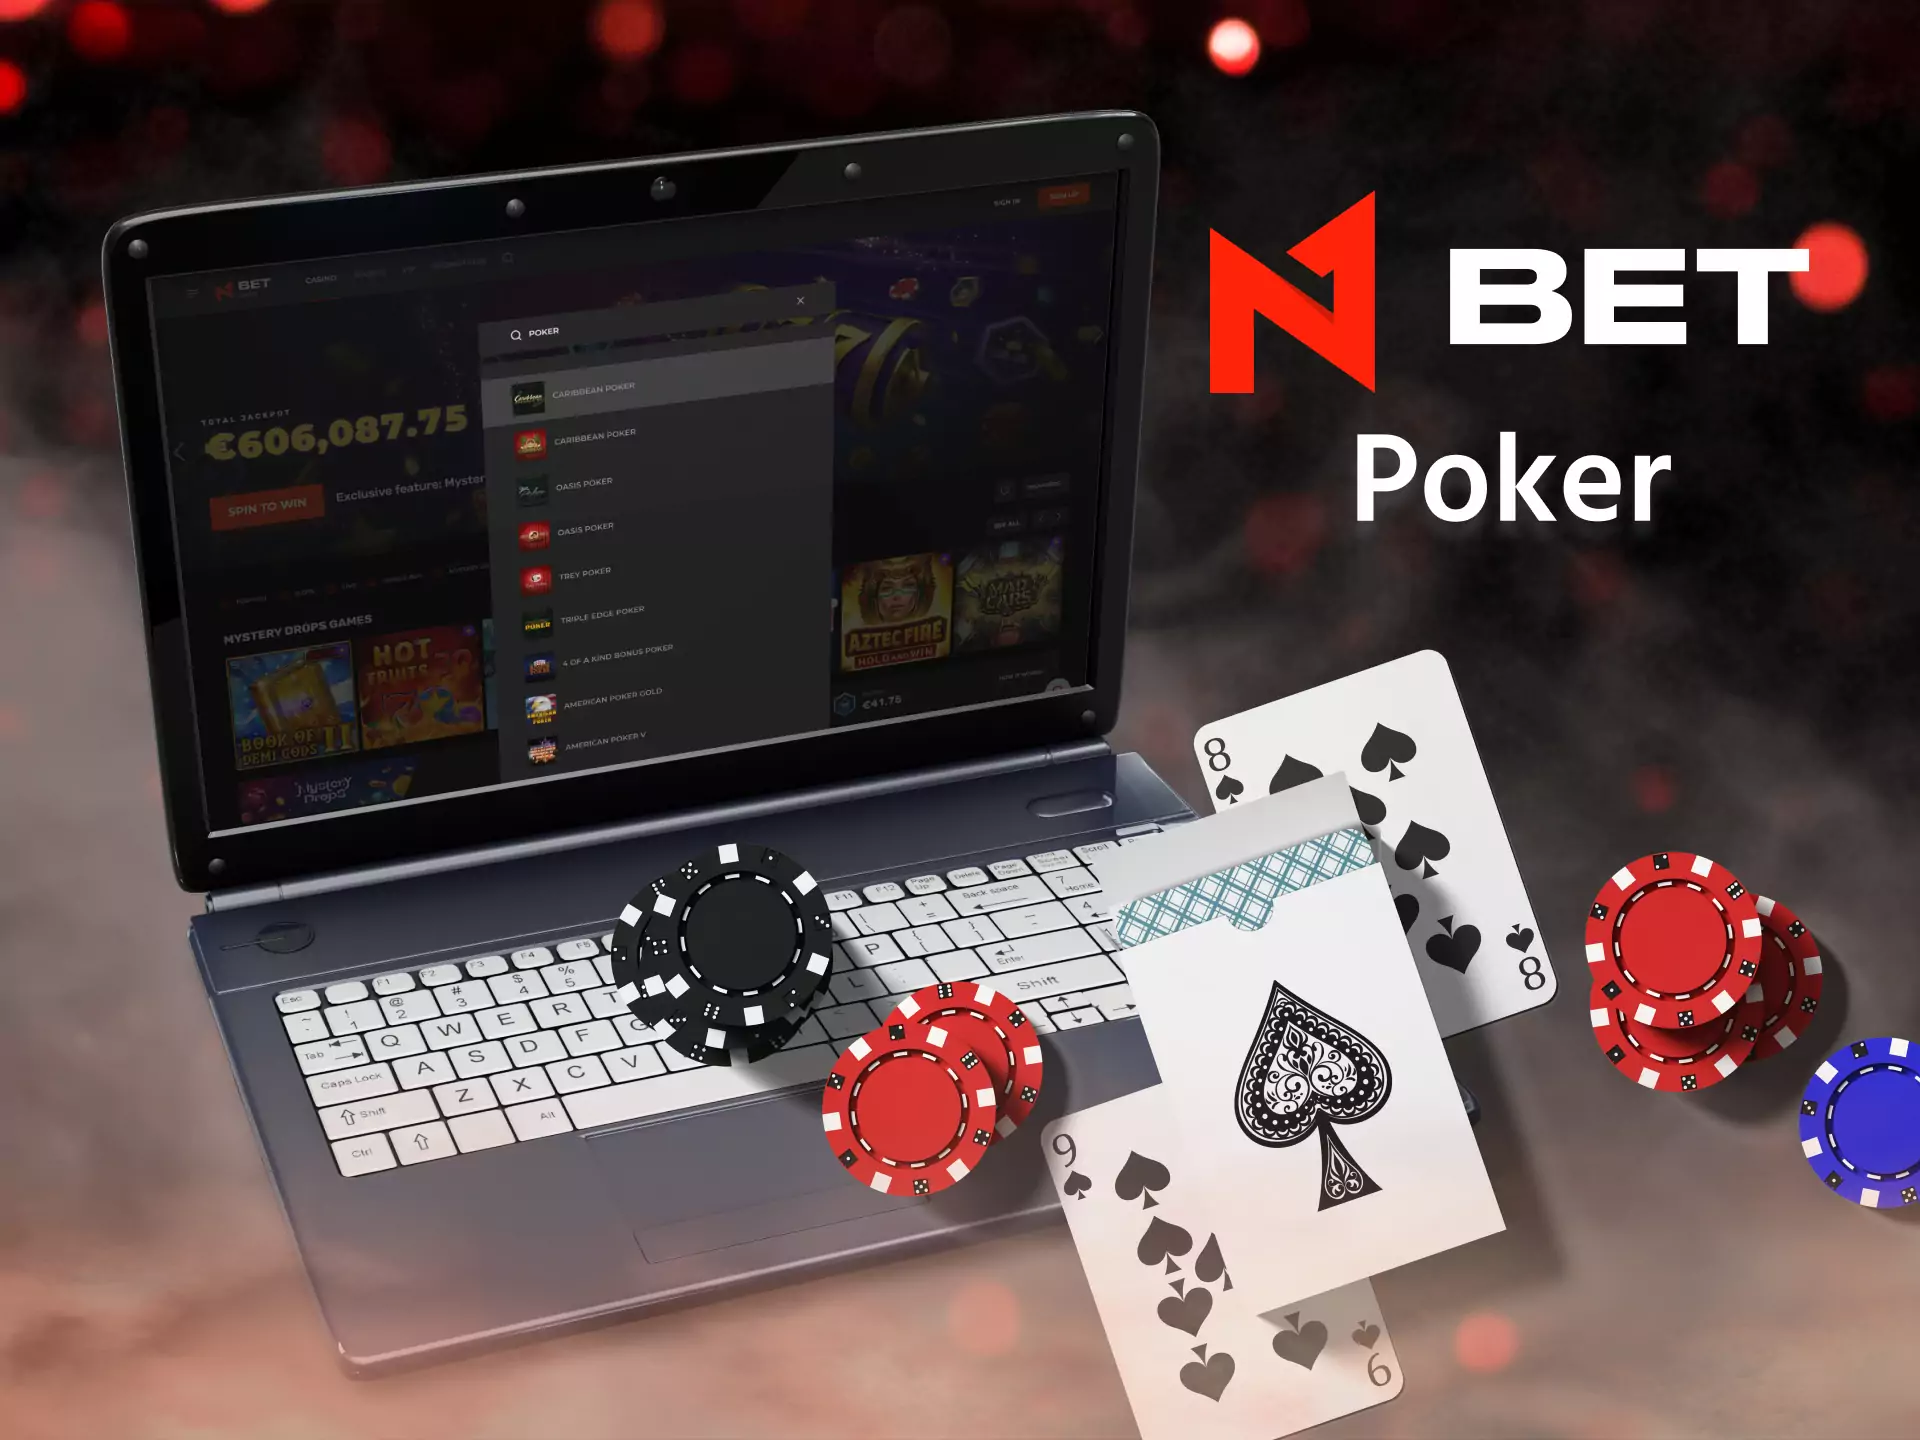 Play and place bets on poker at N1Bet.